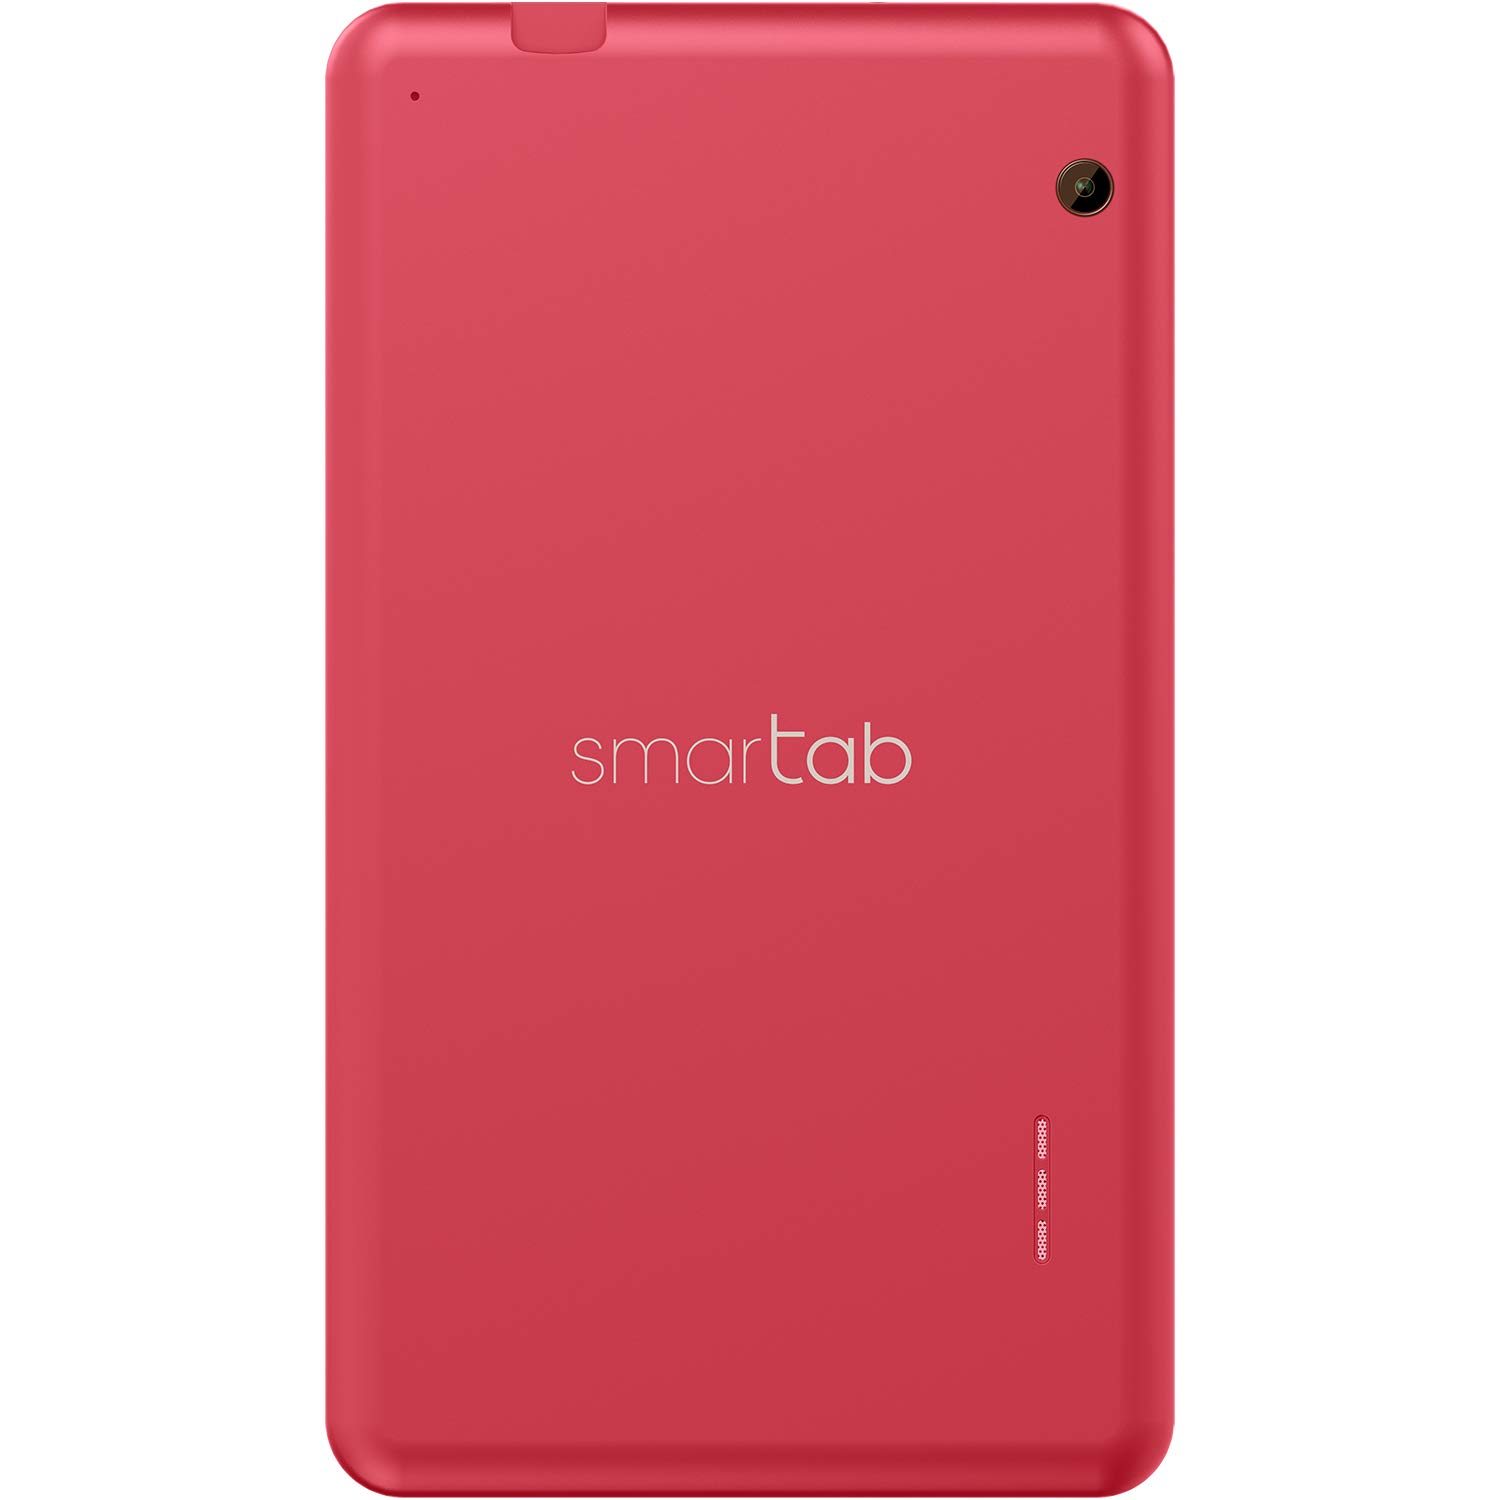 SmarTab 7 inch 16GB Tablet Android OS (Red)